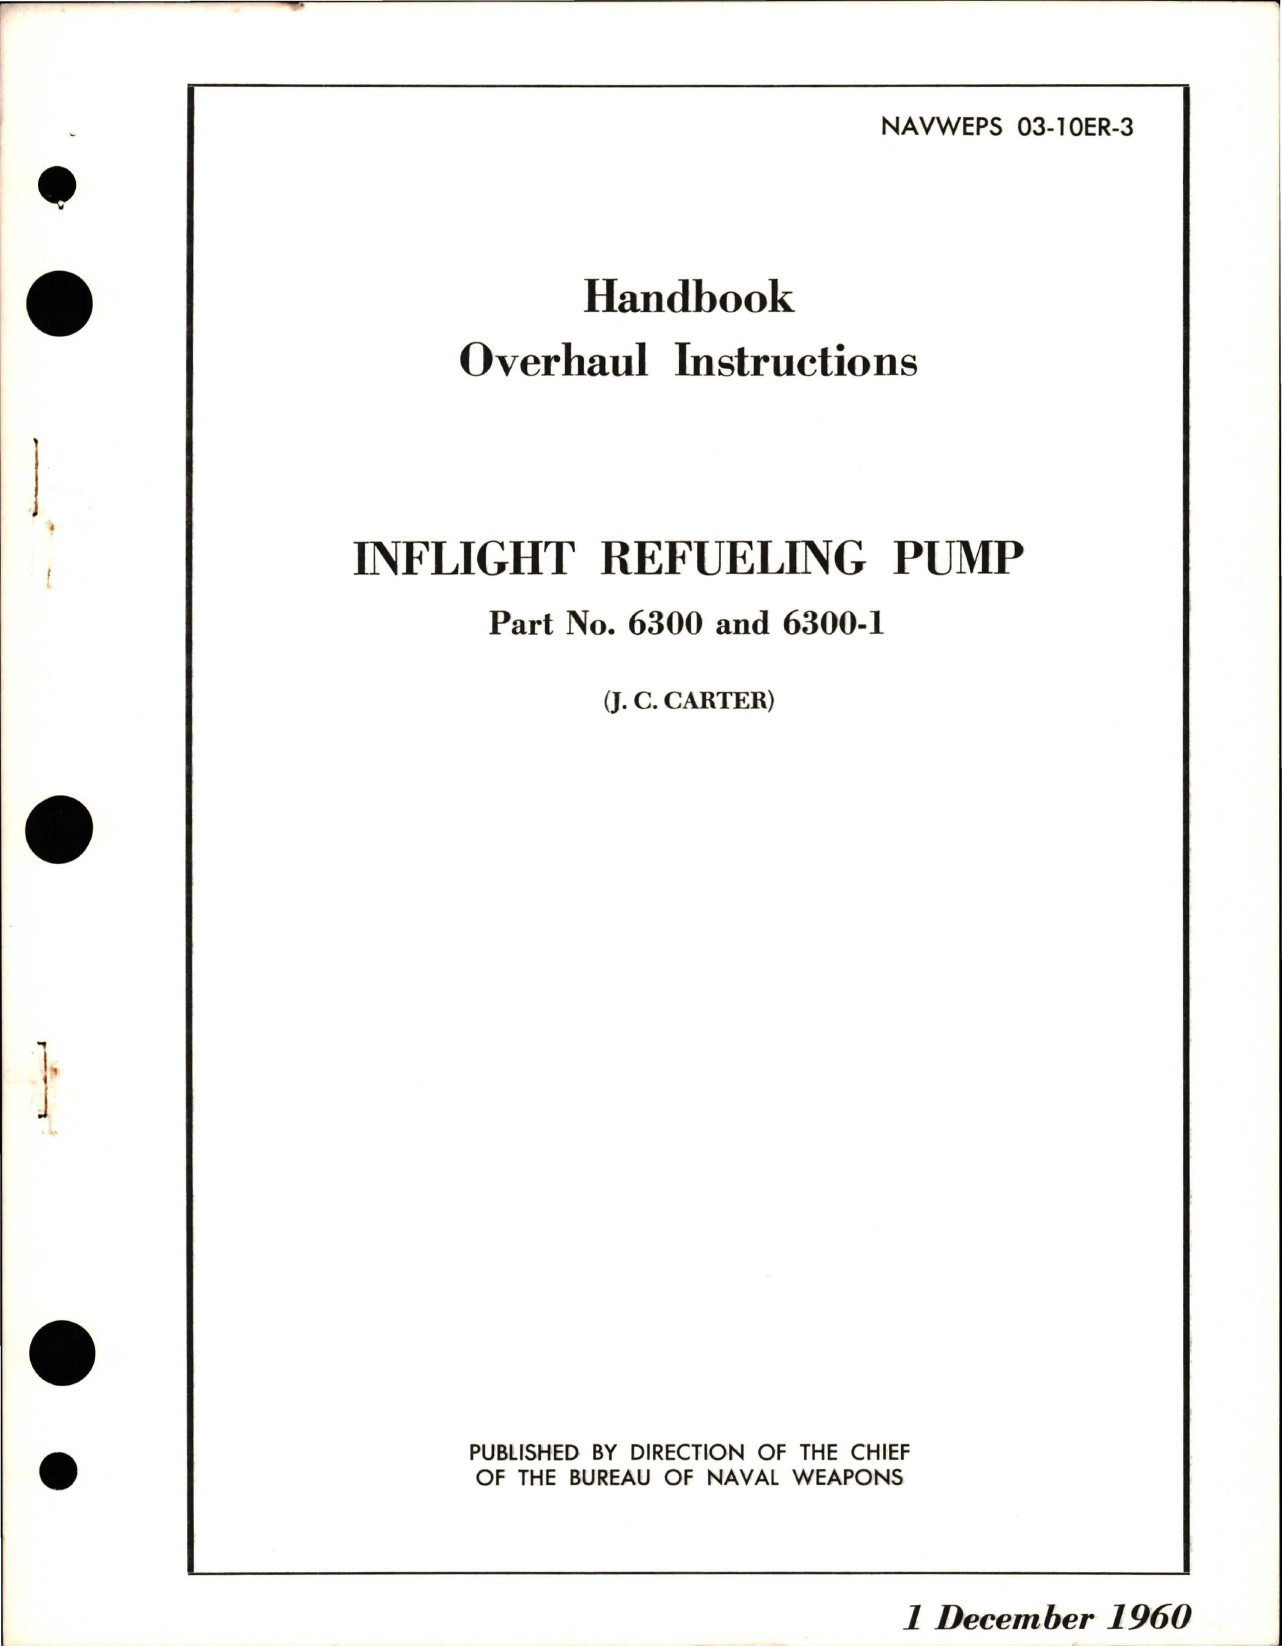 Sample page 1 from AirCorps Library document: Overhaul Instructions for Inflight Refueling Pump - Part 6300 and 6300-1